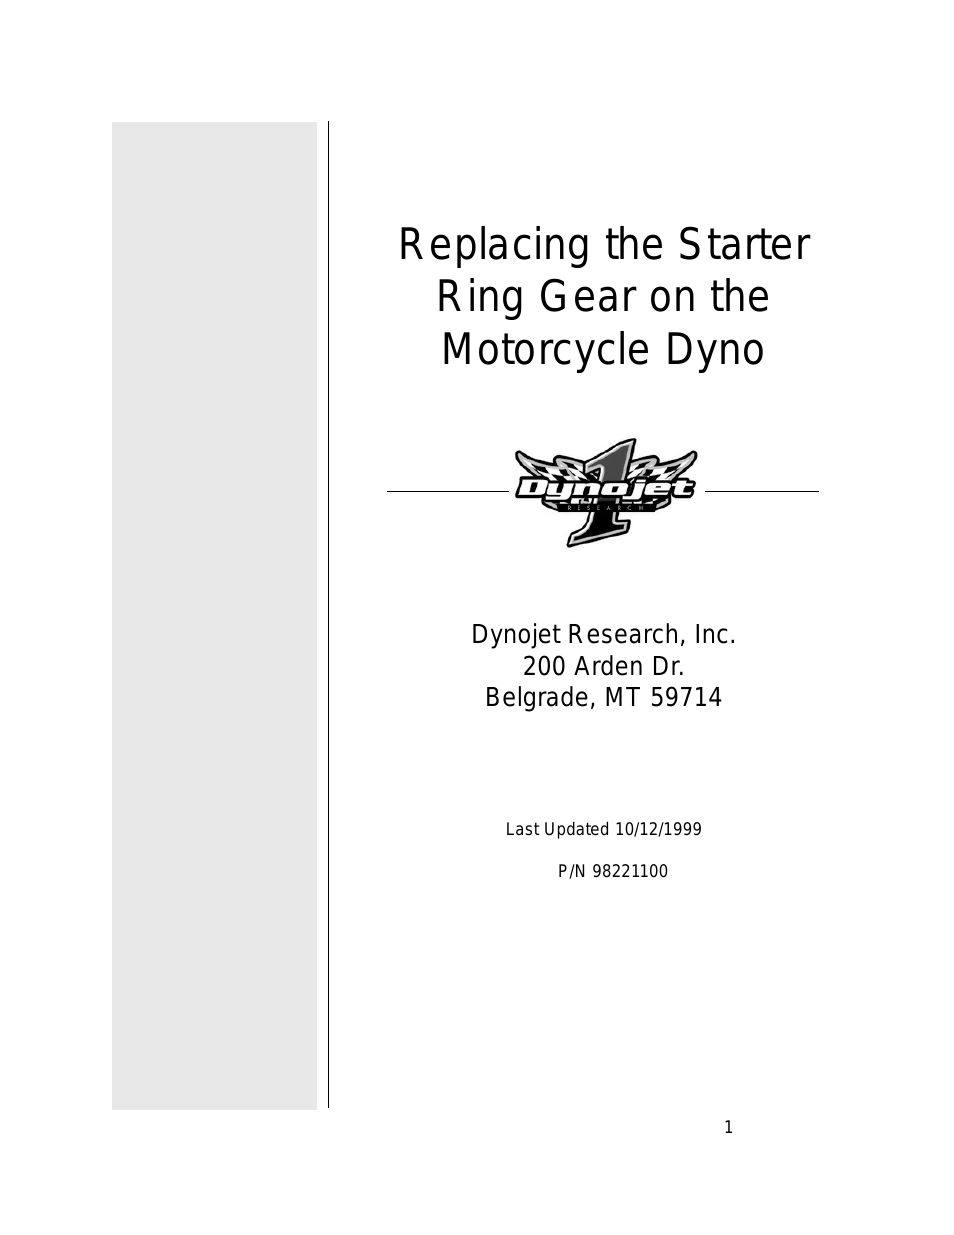 250: Replacing the Starter Ring Gear